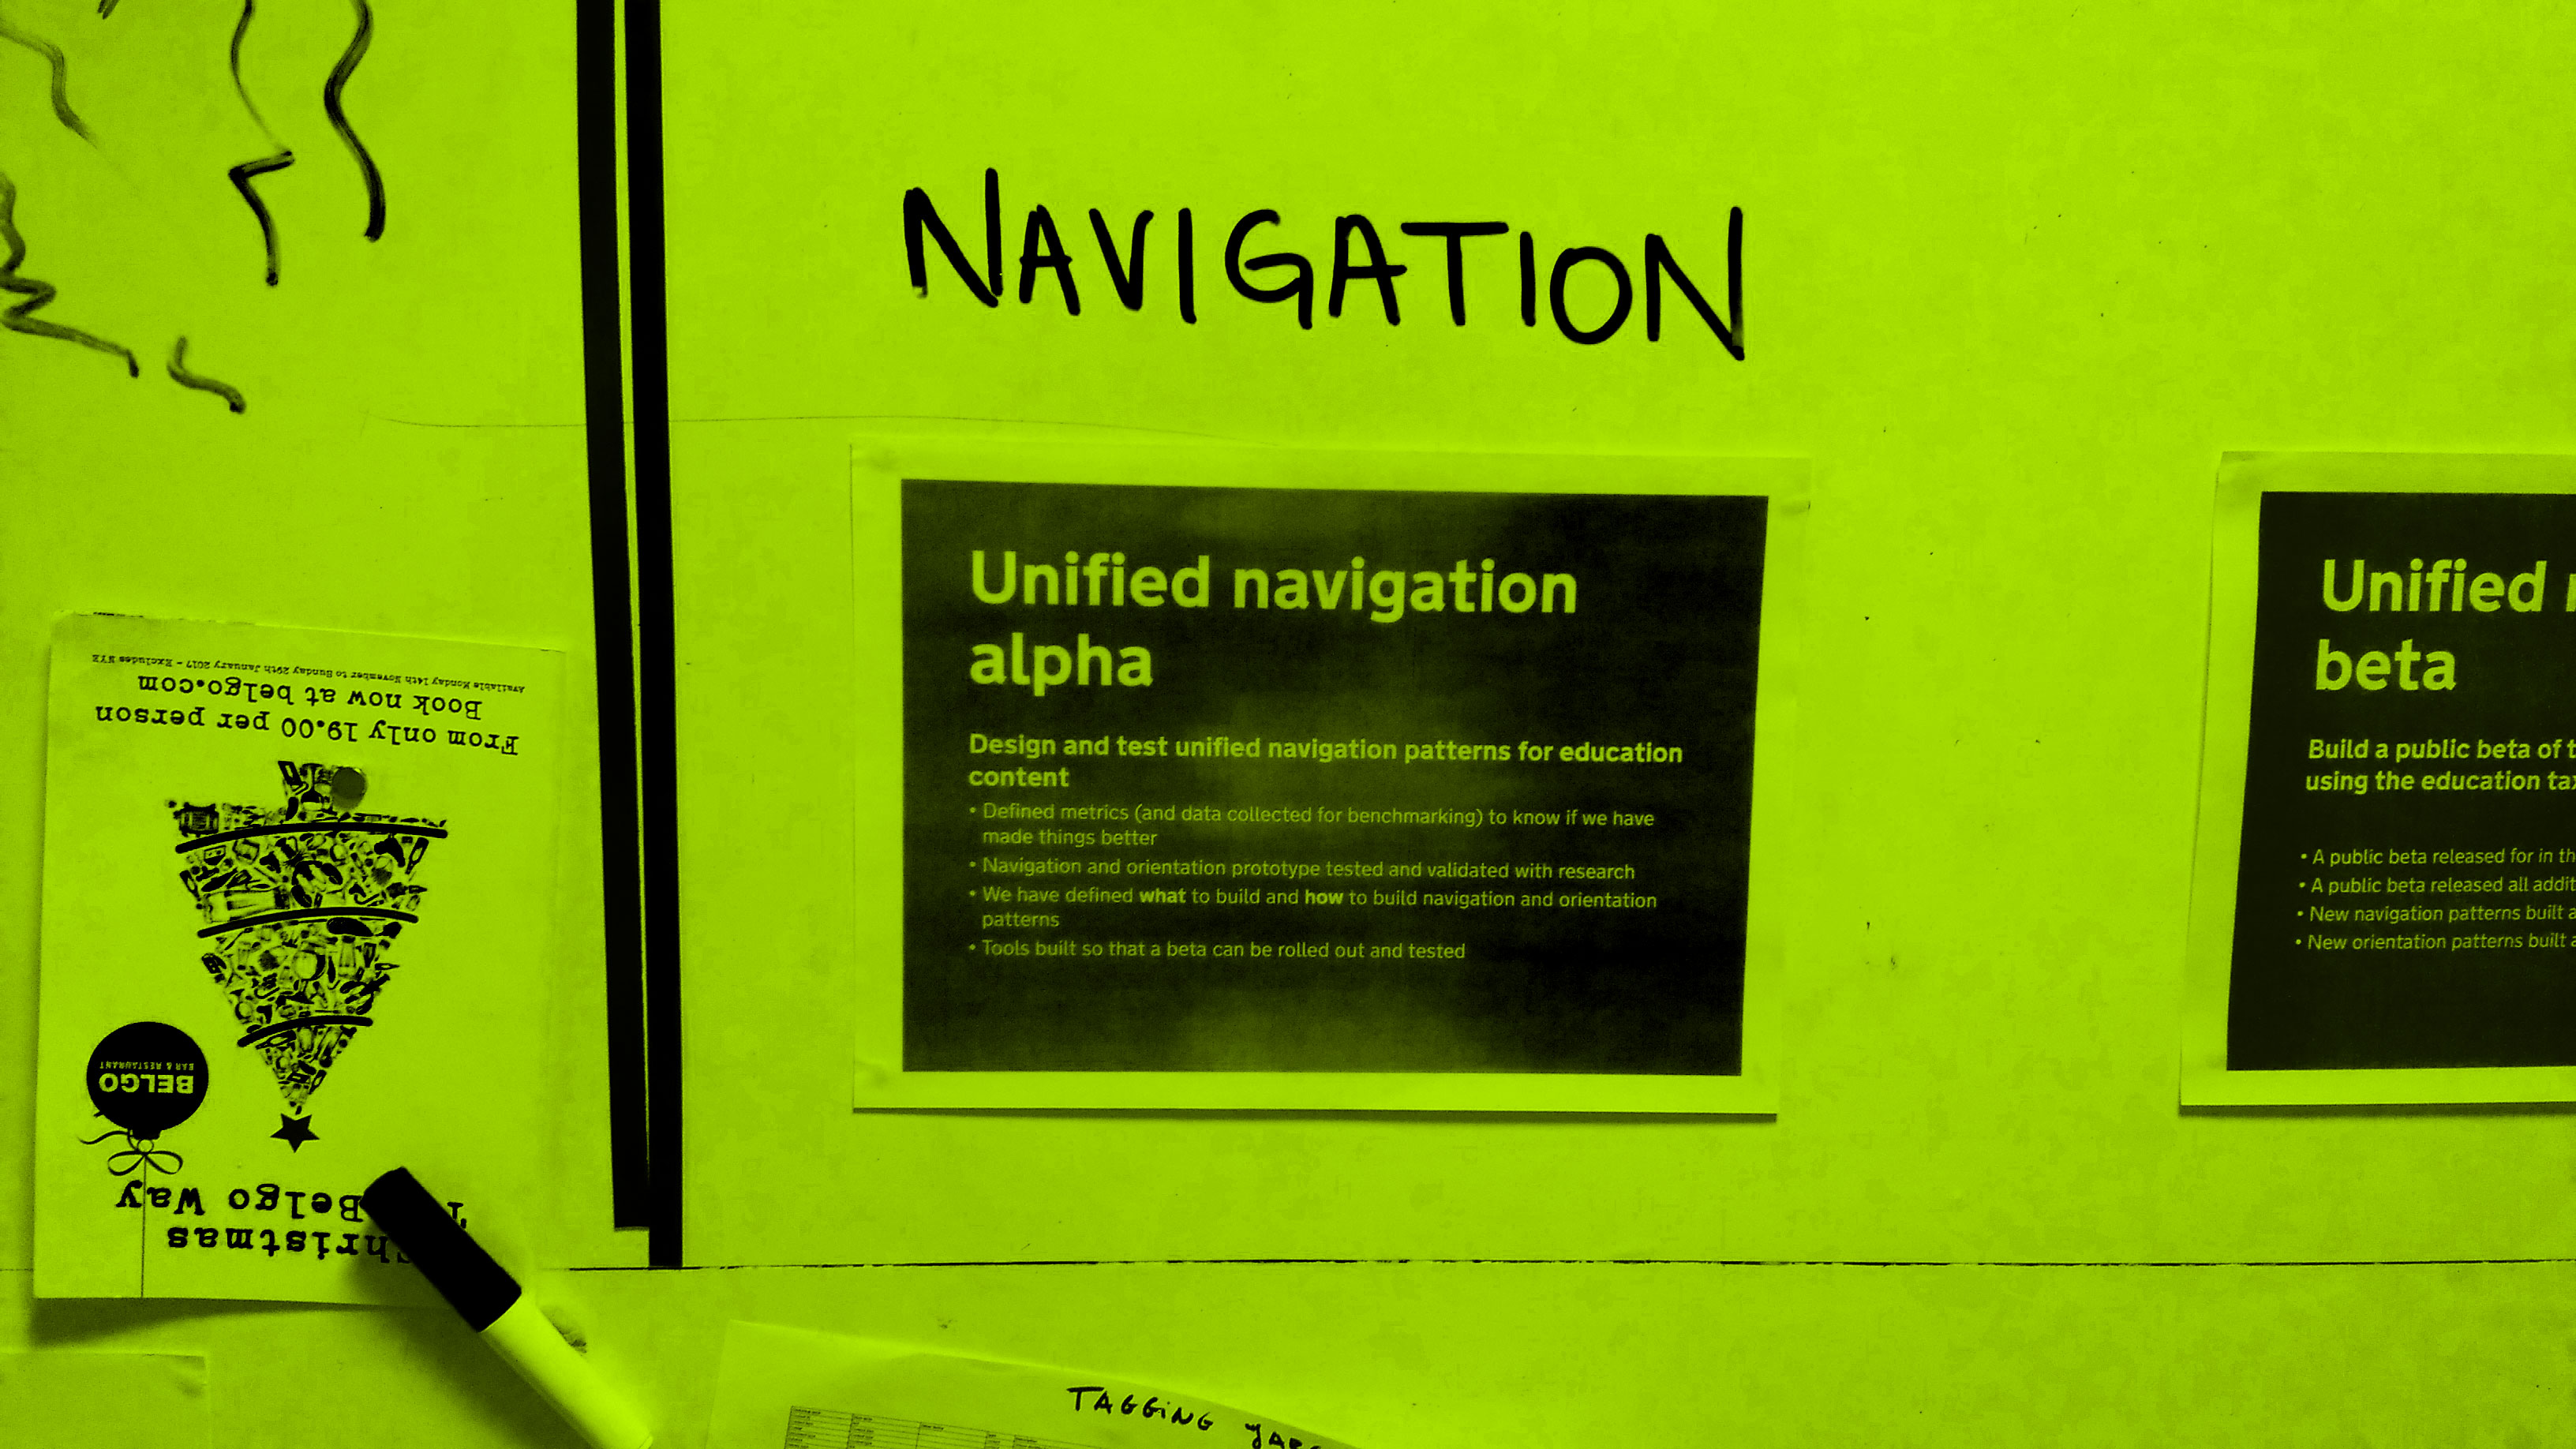 A piece of paper stuck to a whiteboard showing the mission statement for the navigation alpha